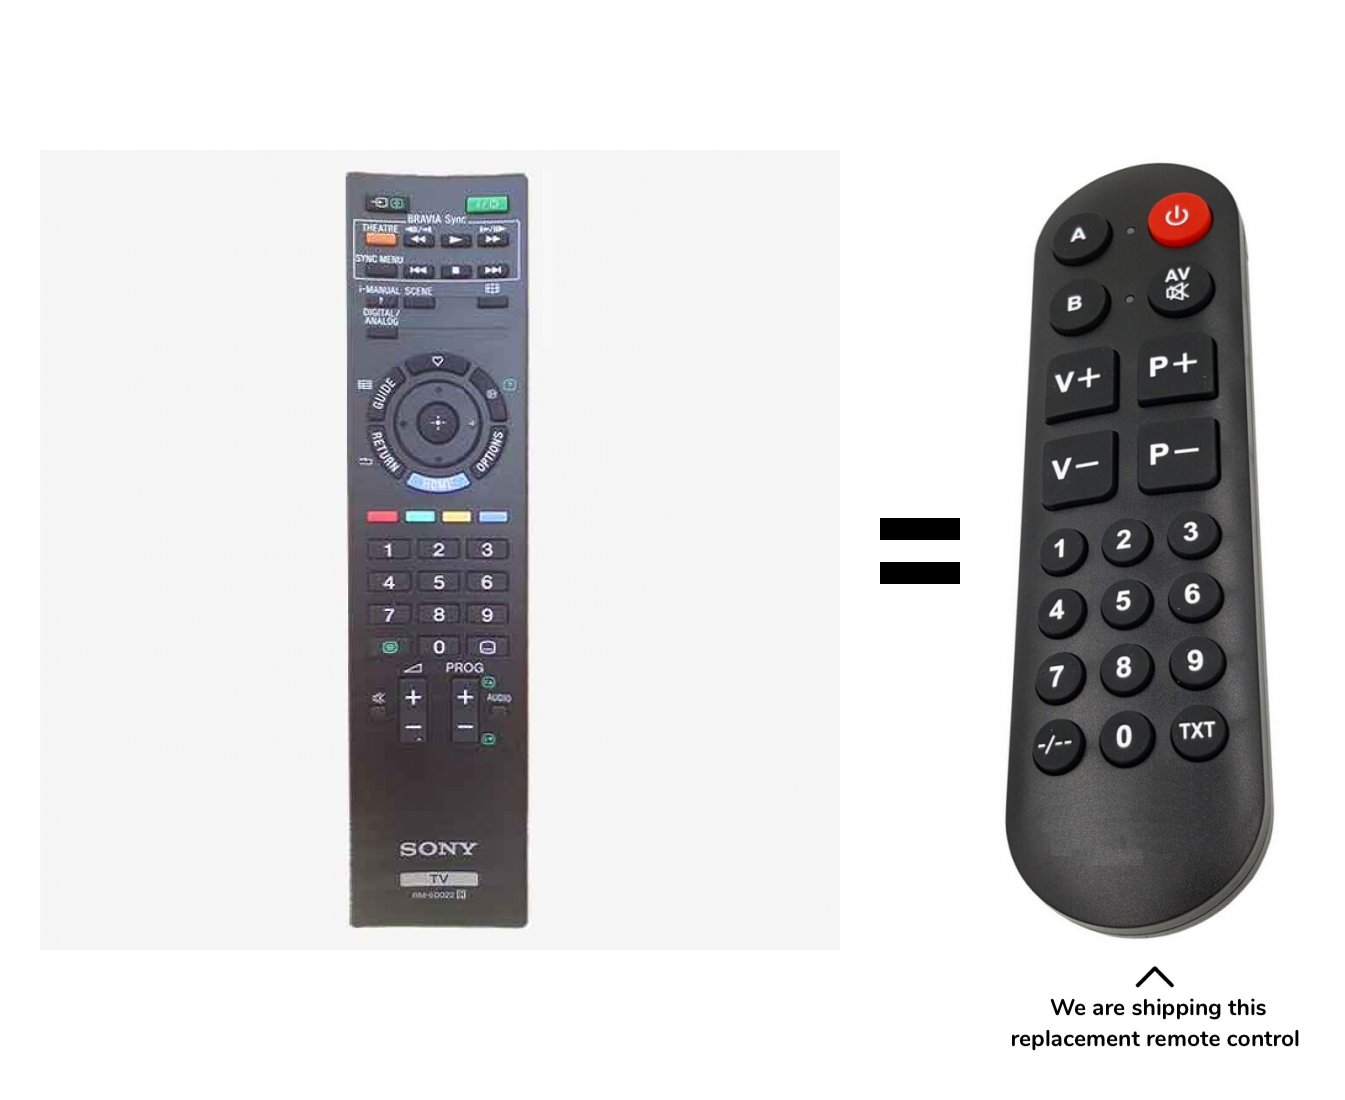 Sony KDL-40BX400 remote control for seniors